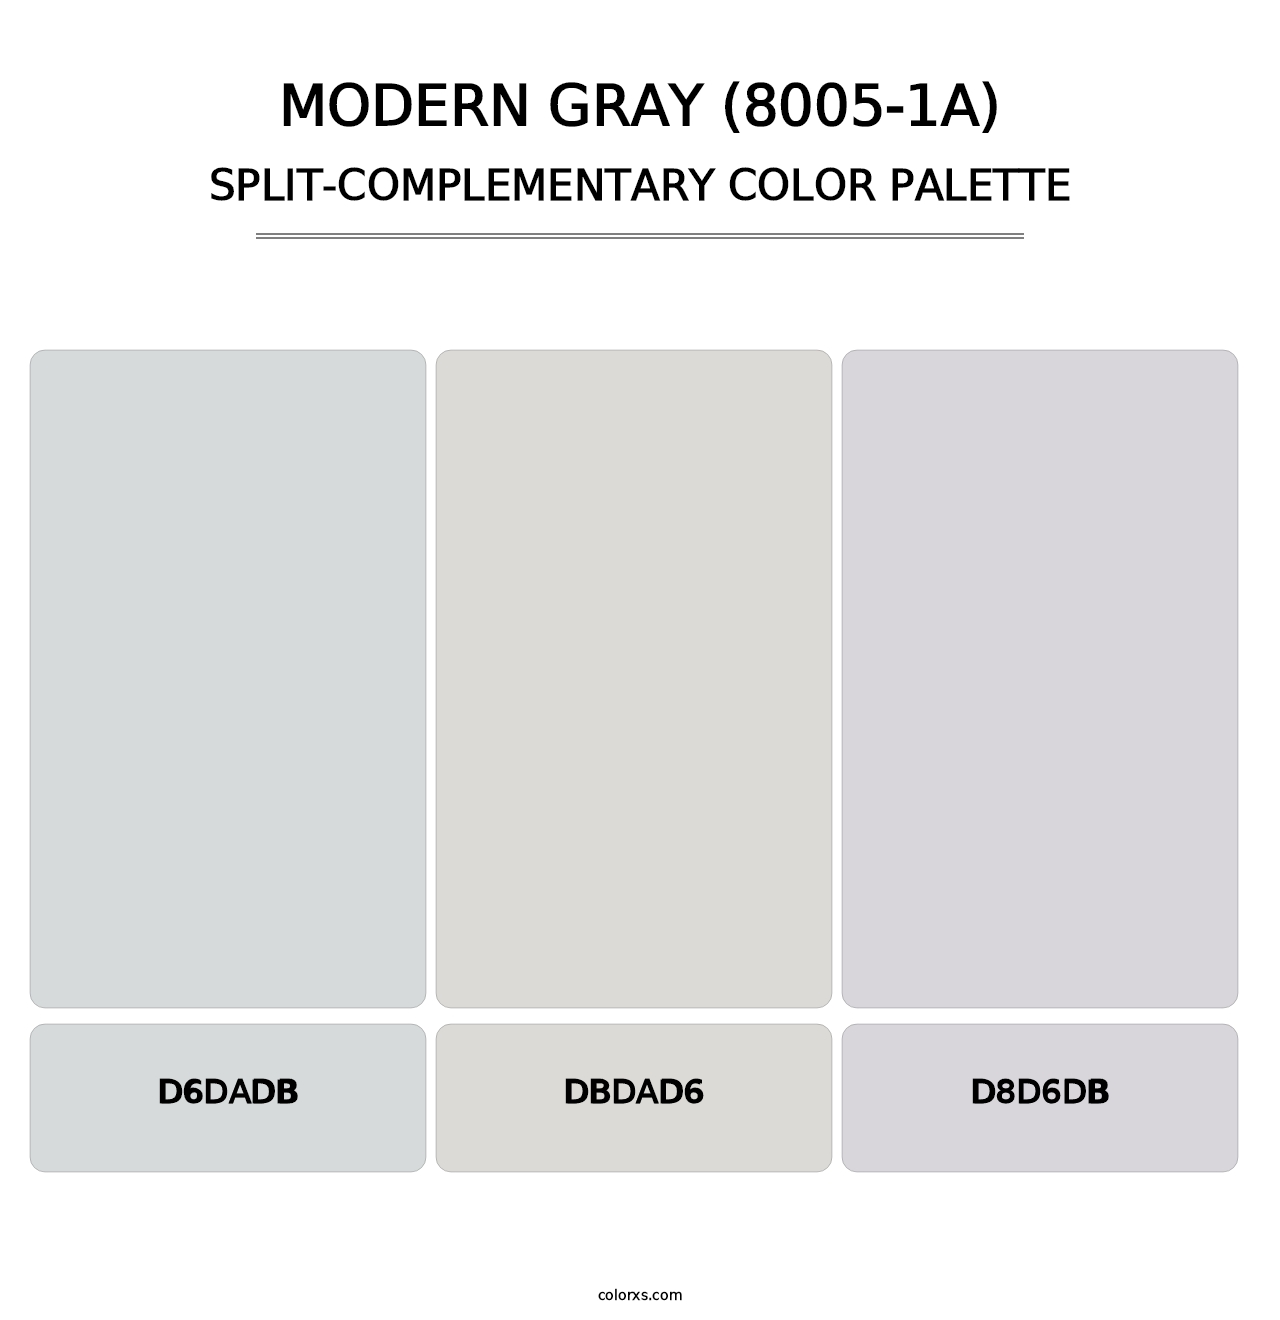 Modern Gray (8005-1A) - Split-Complementary Color Palette